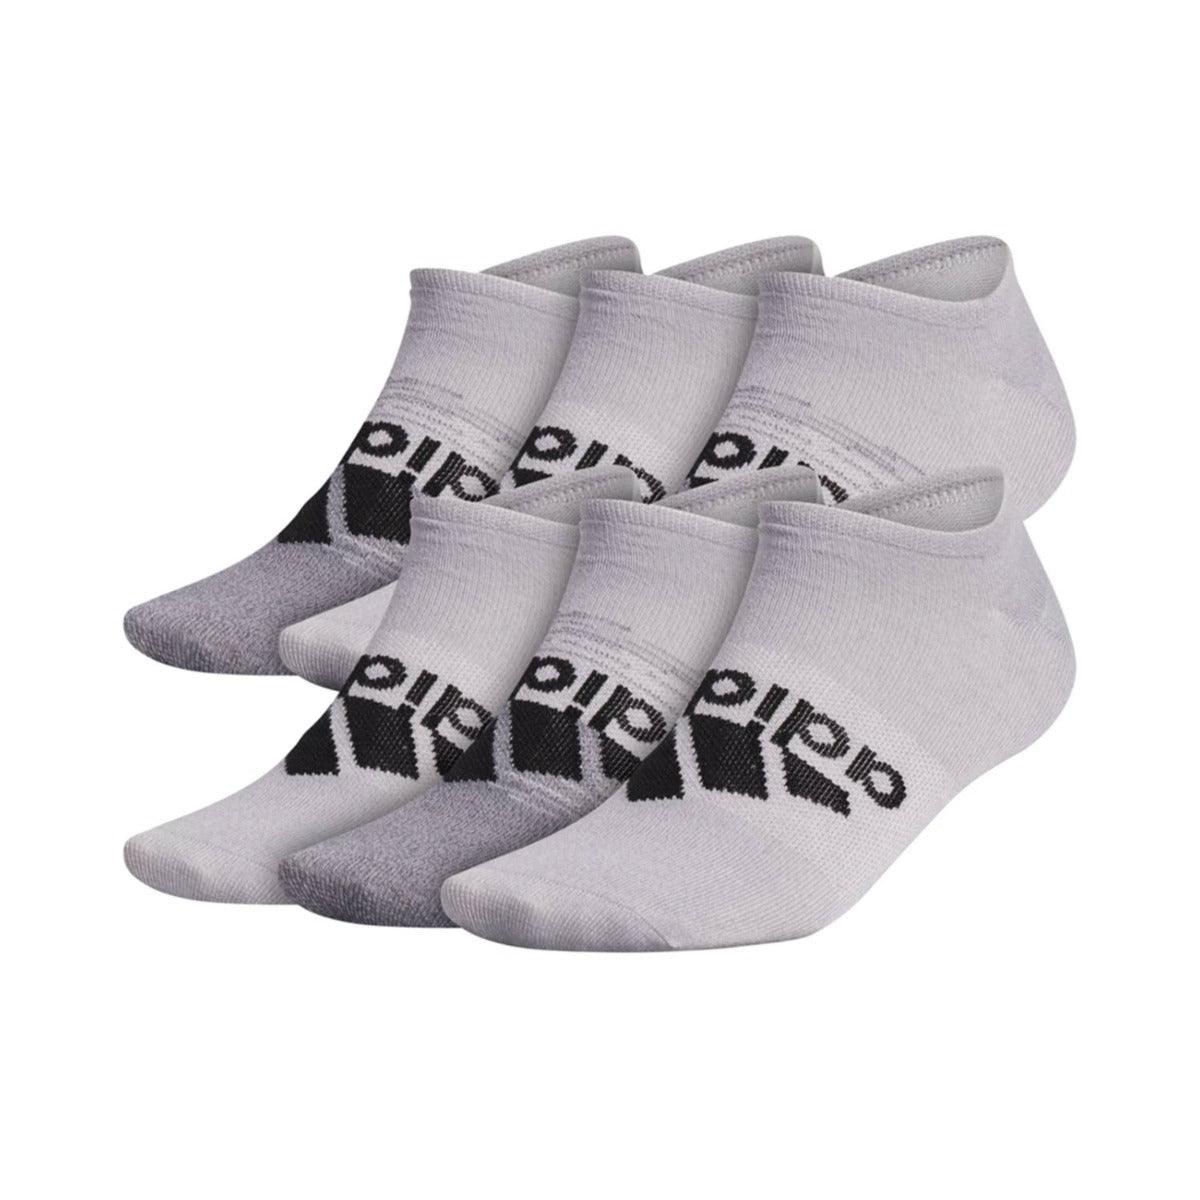 Adidas Athletic Superlite No Show Socks (6 Pairs) - One Size - The Next Pair